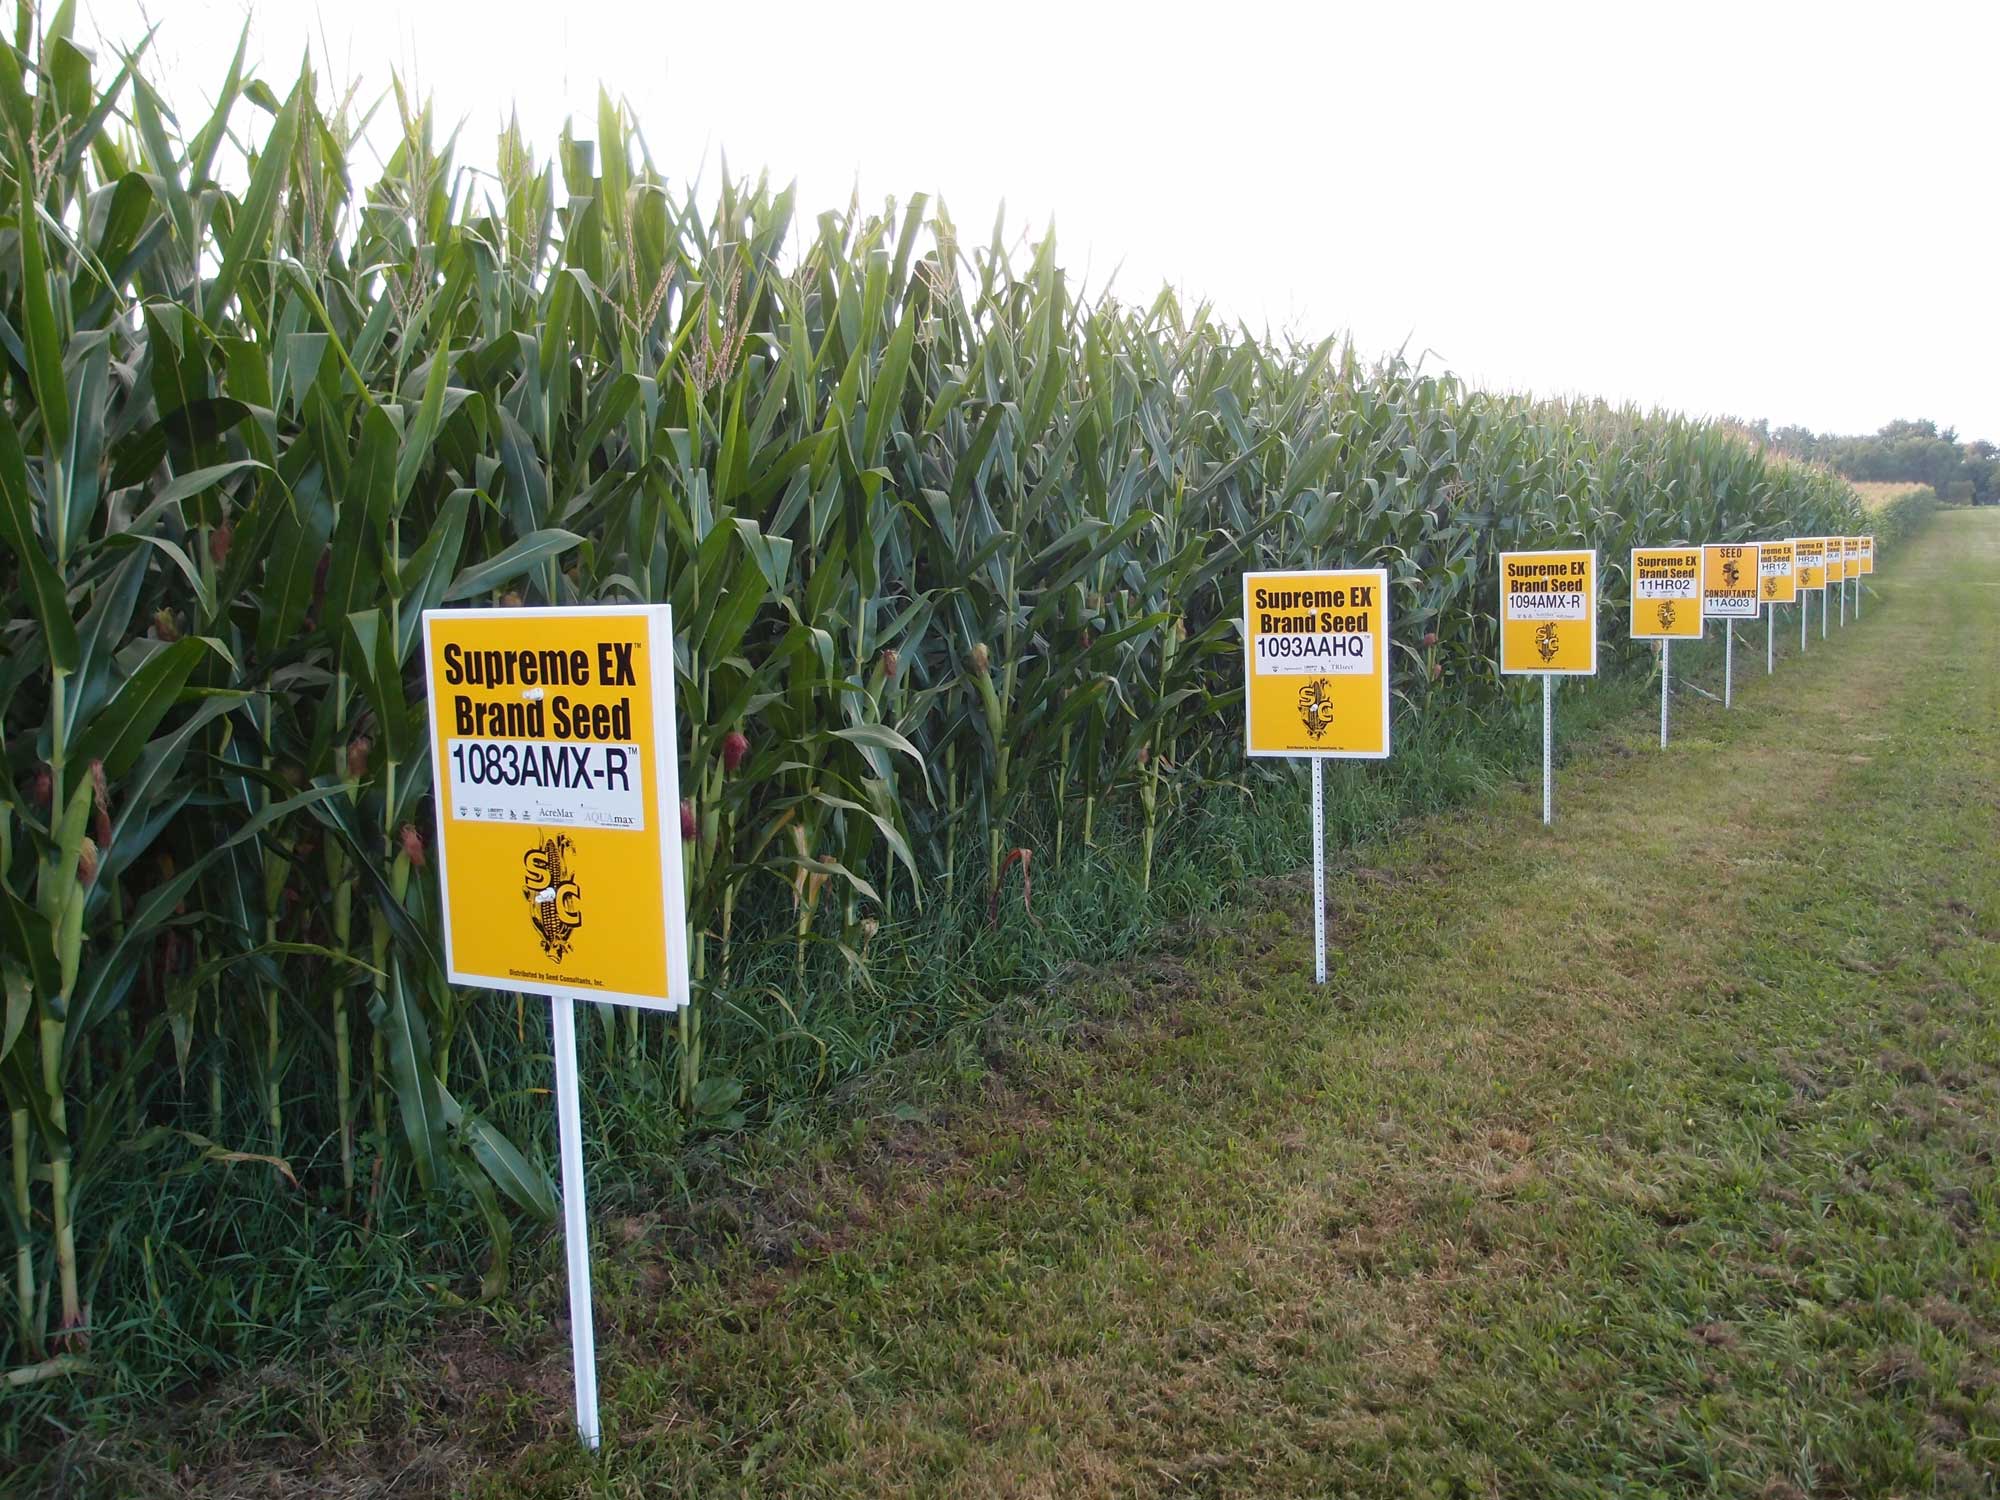 Photograph of a field of hybrid maize. On the right side of the field is a mowed area in which signs have been placed at regular intervals. The signs are yellow and white and are labeled with the brand and code for different types of seed. The nearest sign says "Supreme EX Brand Seed 1083AMX-R."